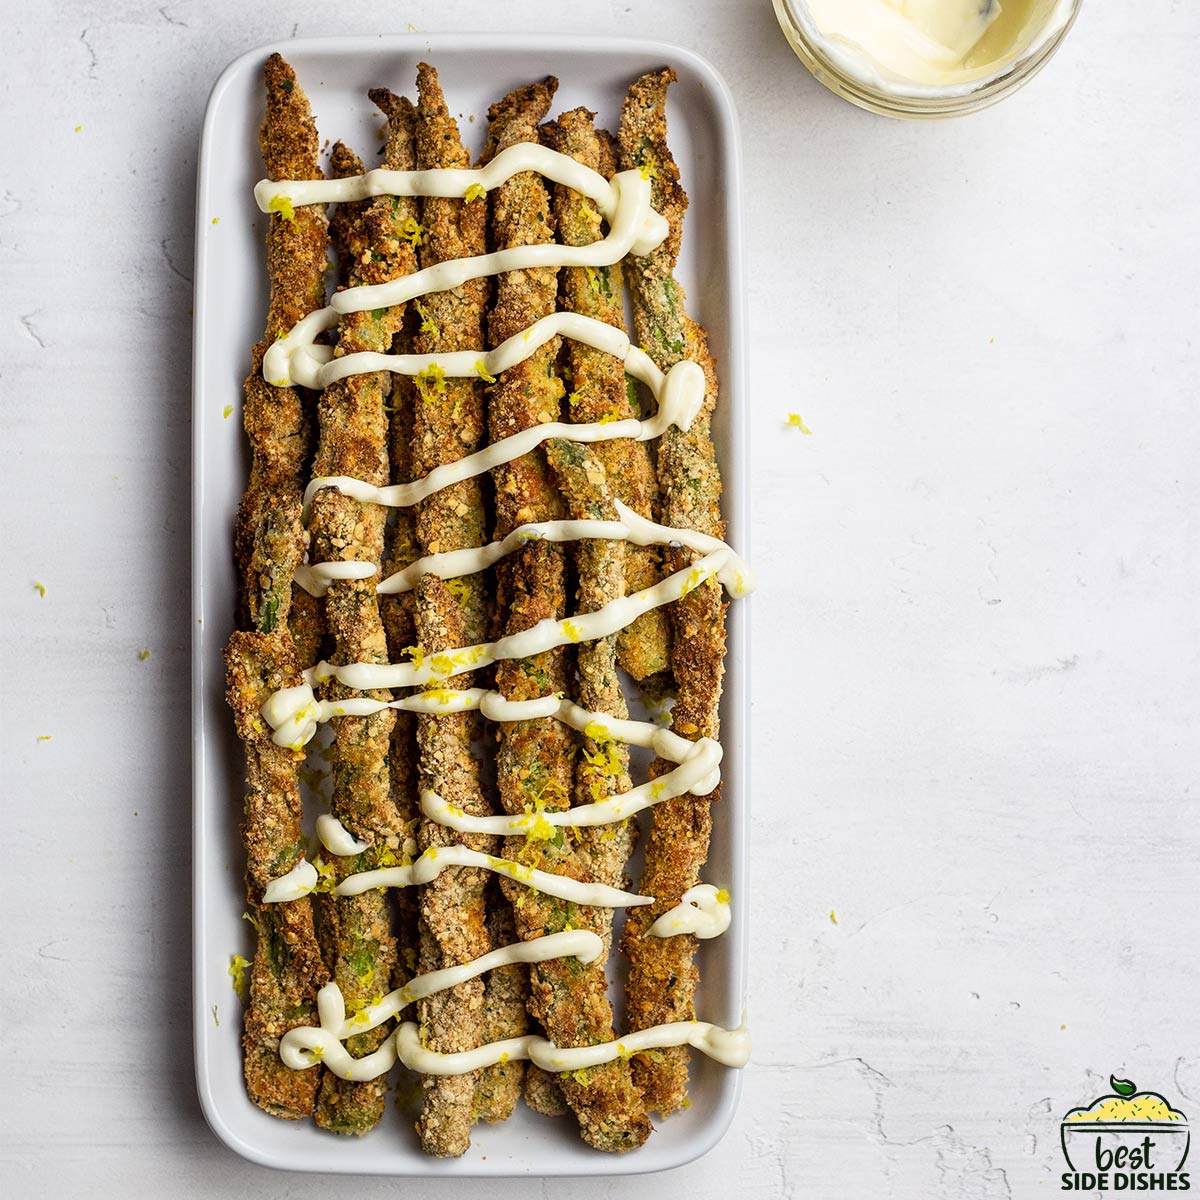 asparagus fries drizzled with aioli dip on a platter